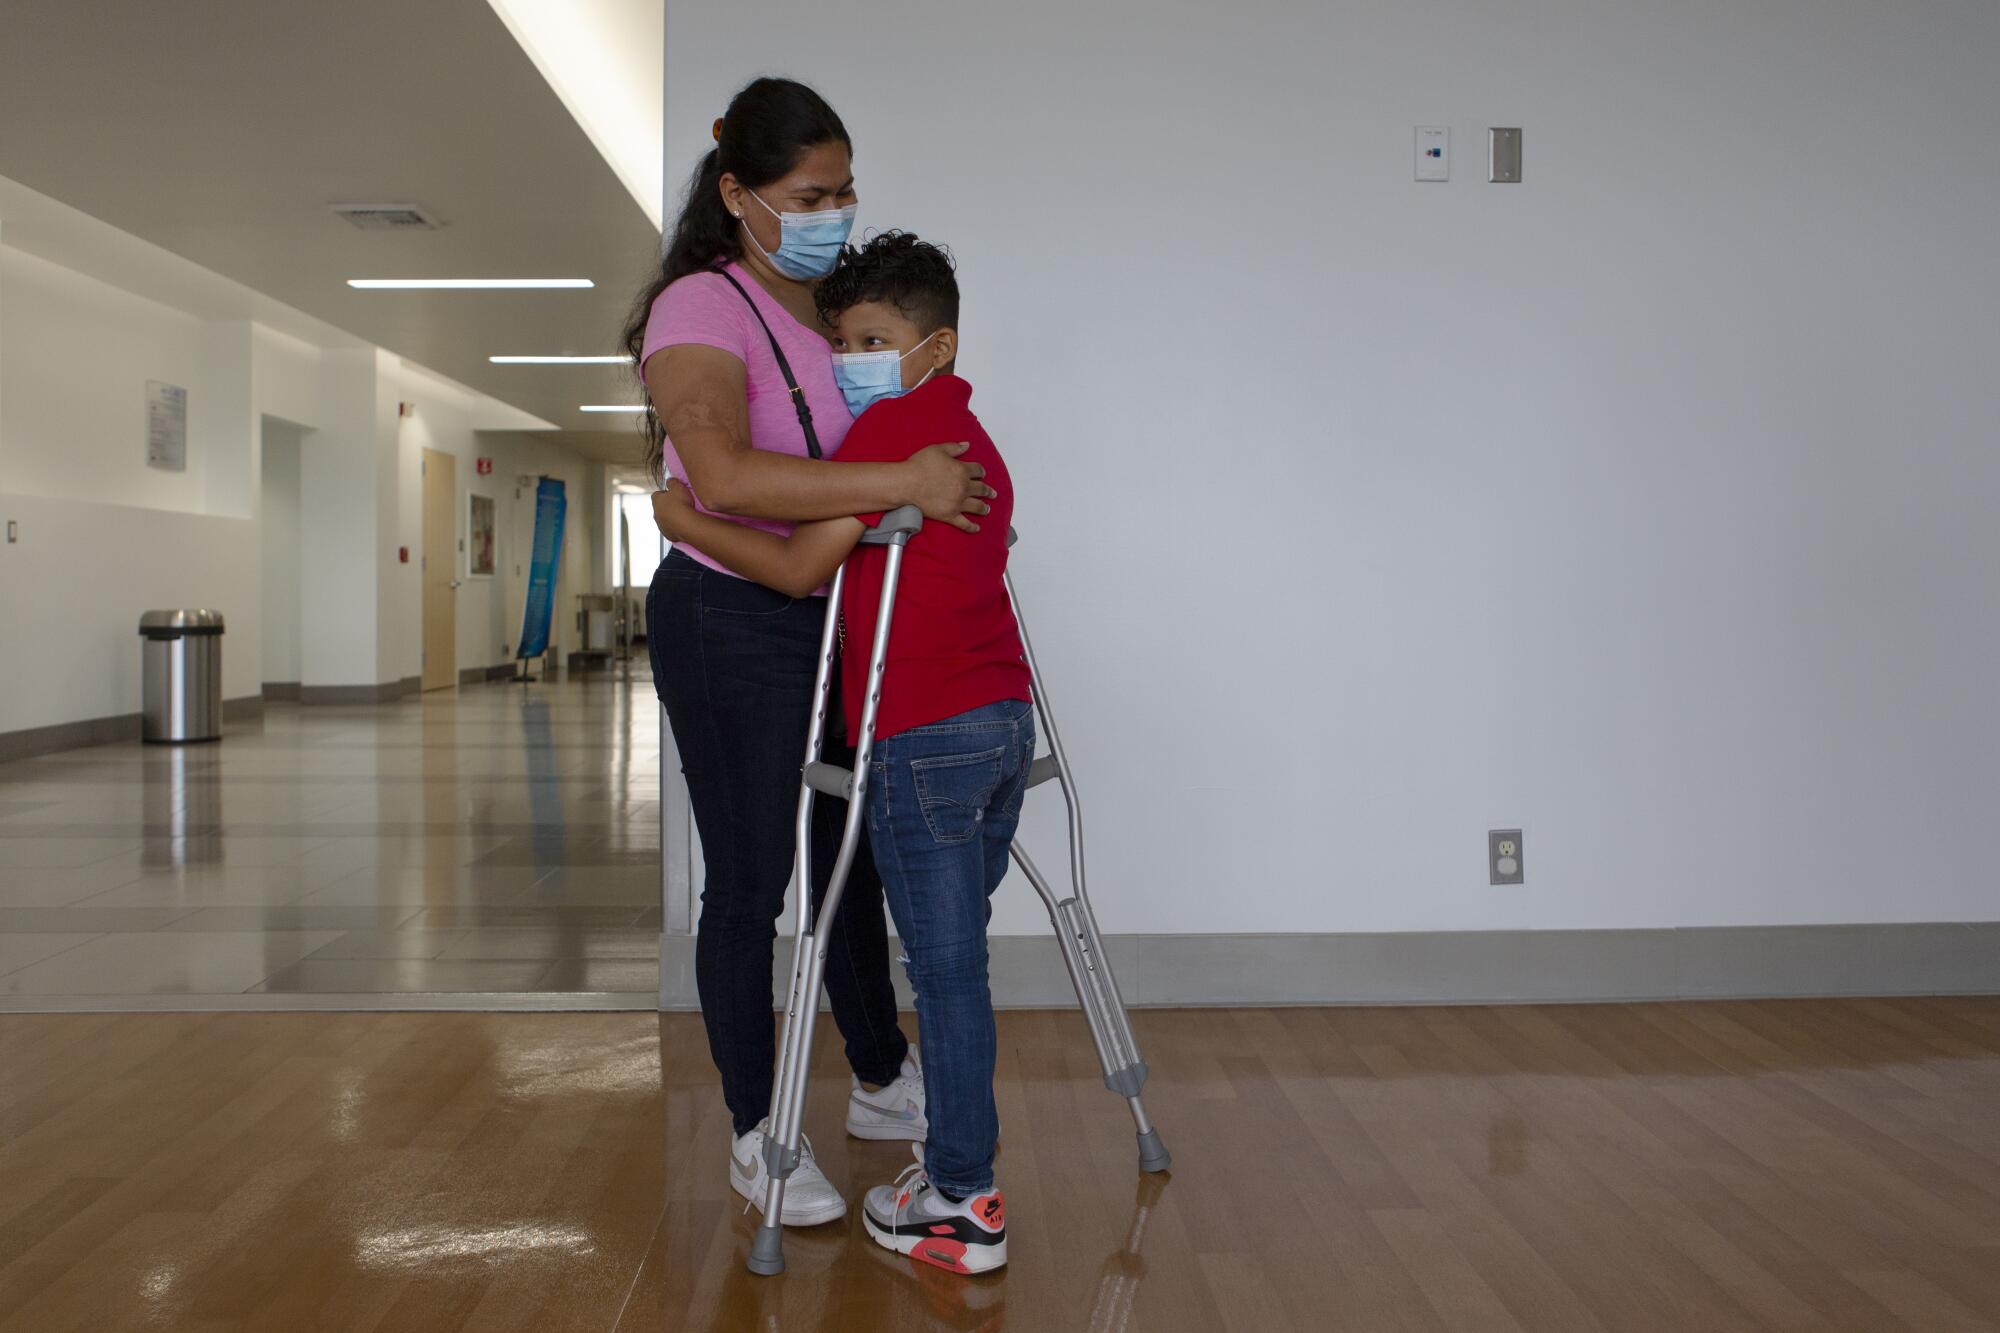 Efrain stands with his crutches and hugs his mother